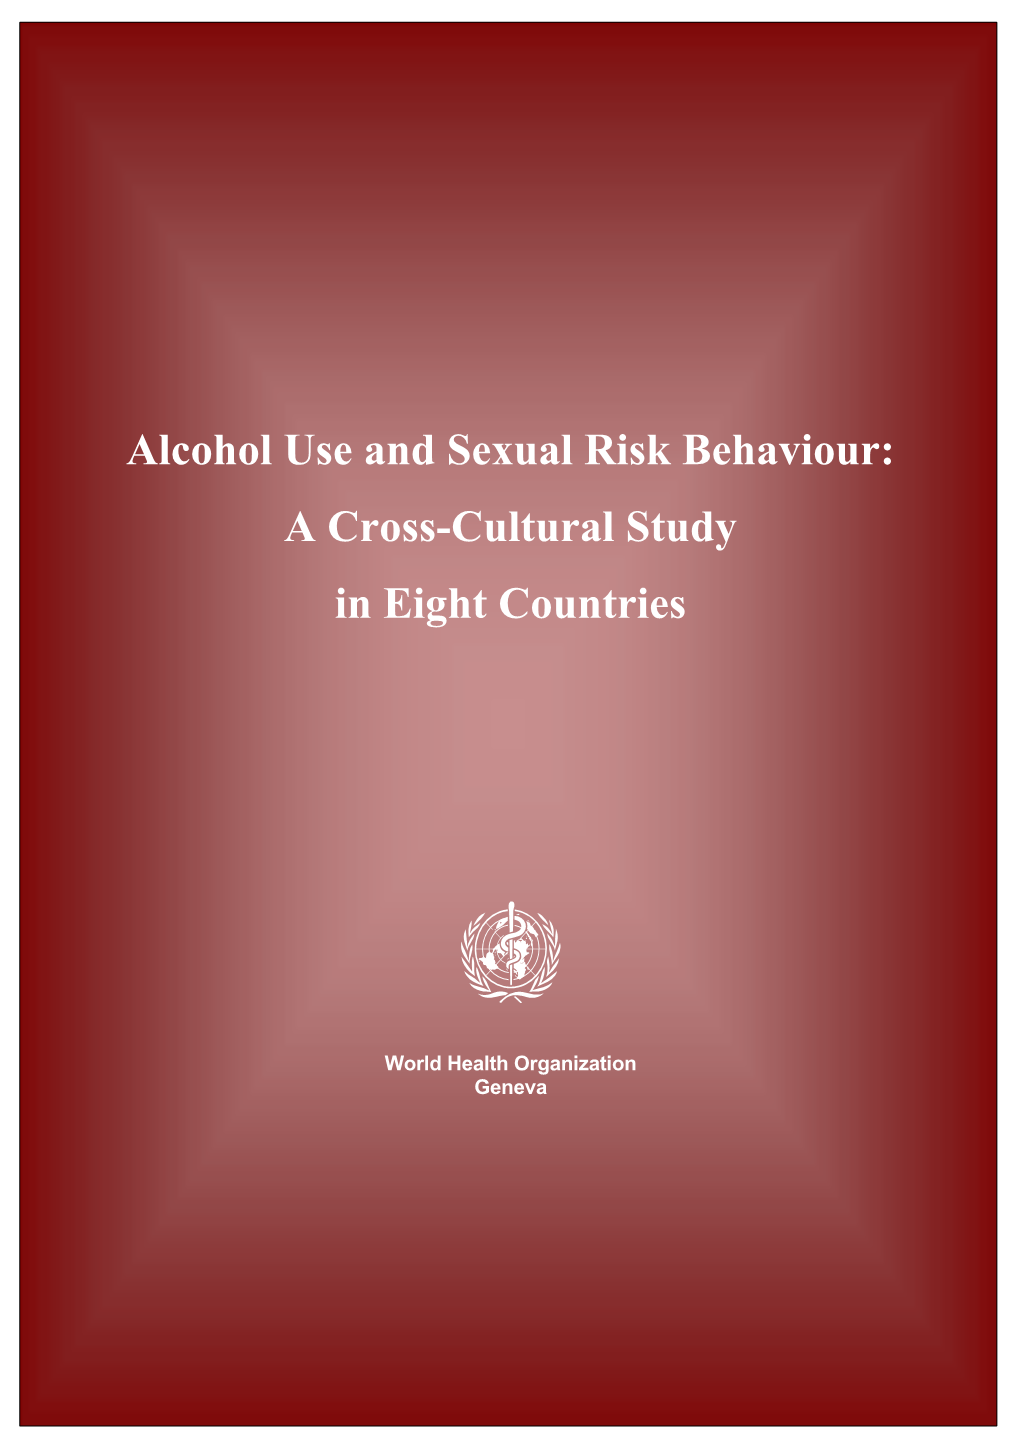 Alcohol Use and Sexual Risk Behaviour: a Cross-Cultural Study in Eight Countries